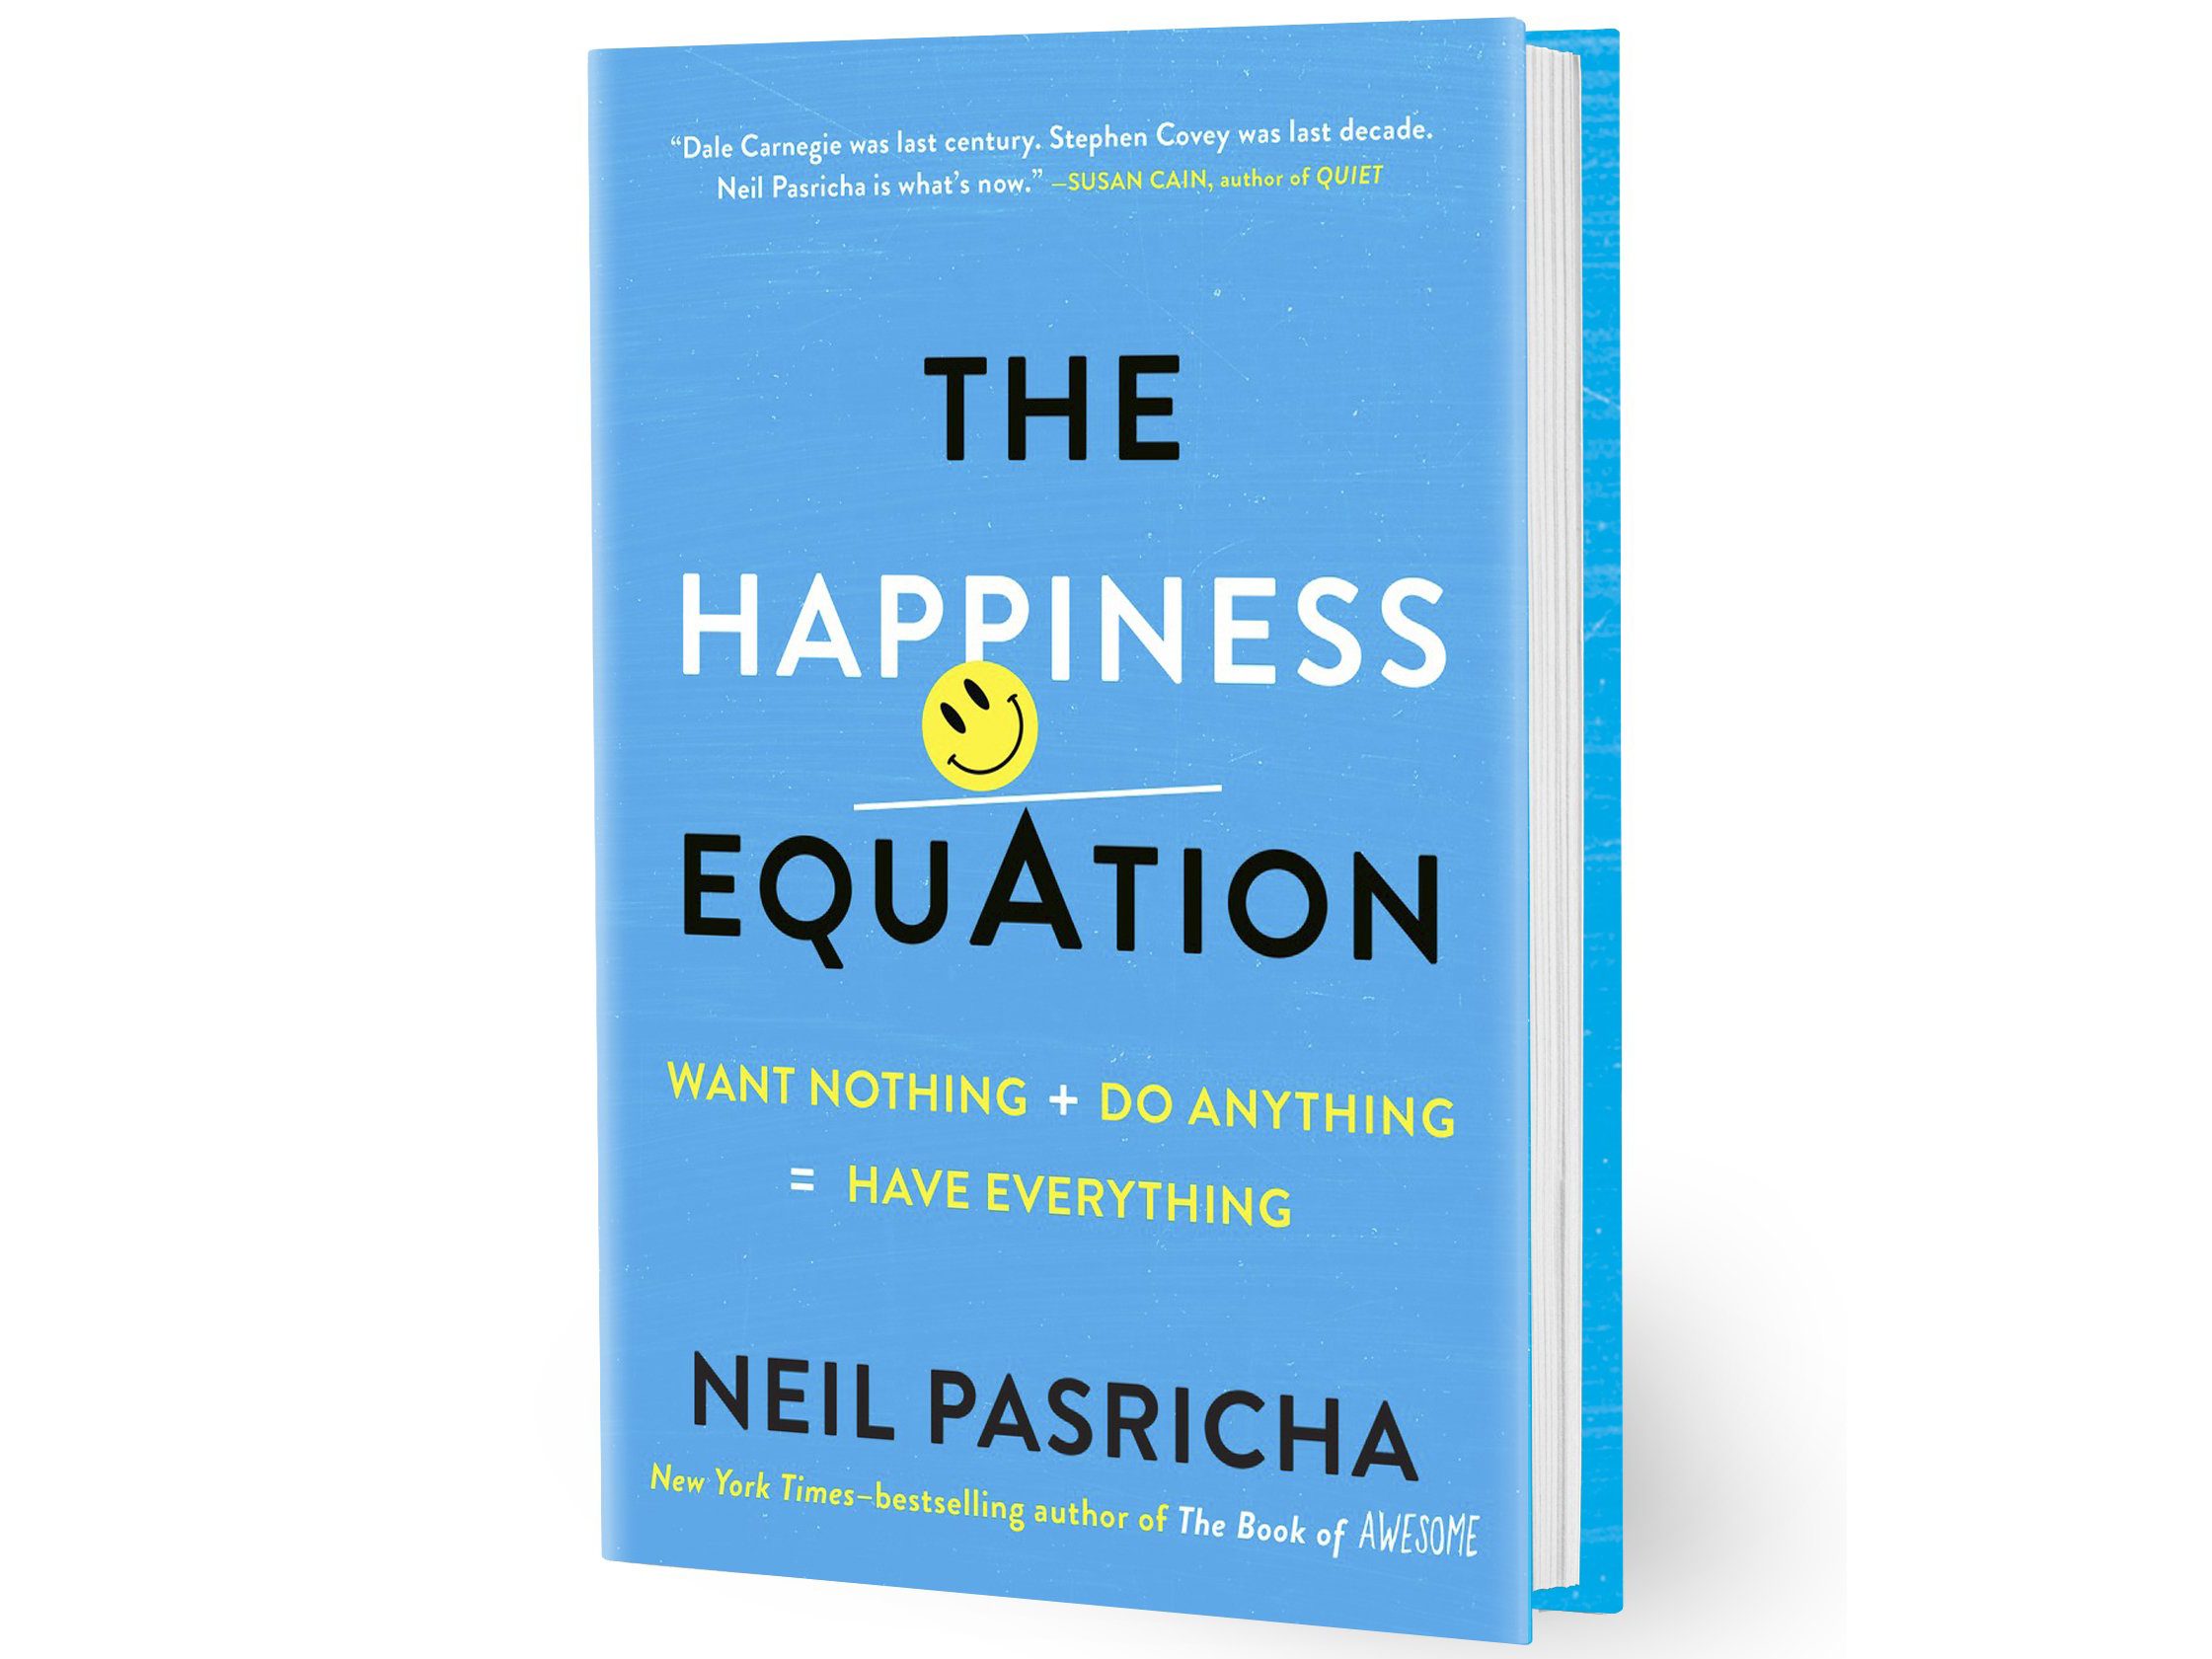 The Happiness Equation by Neil Pasricha